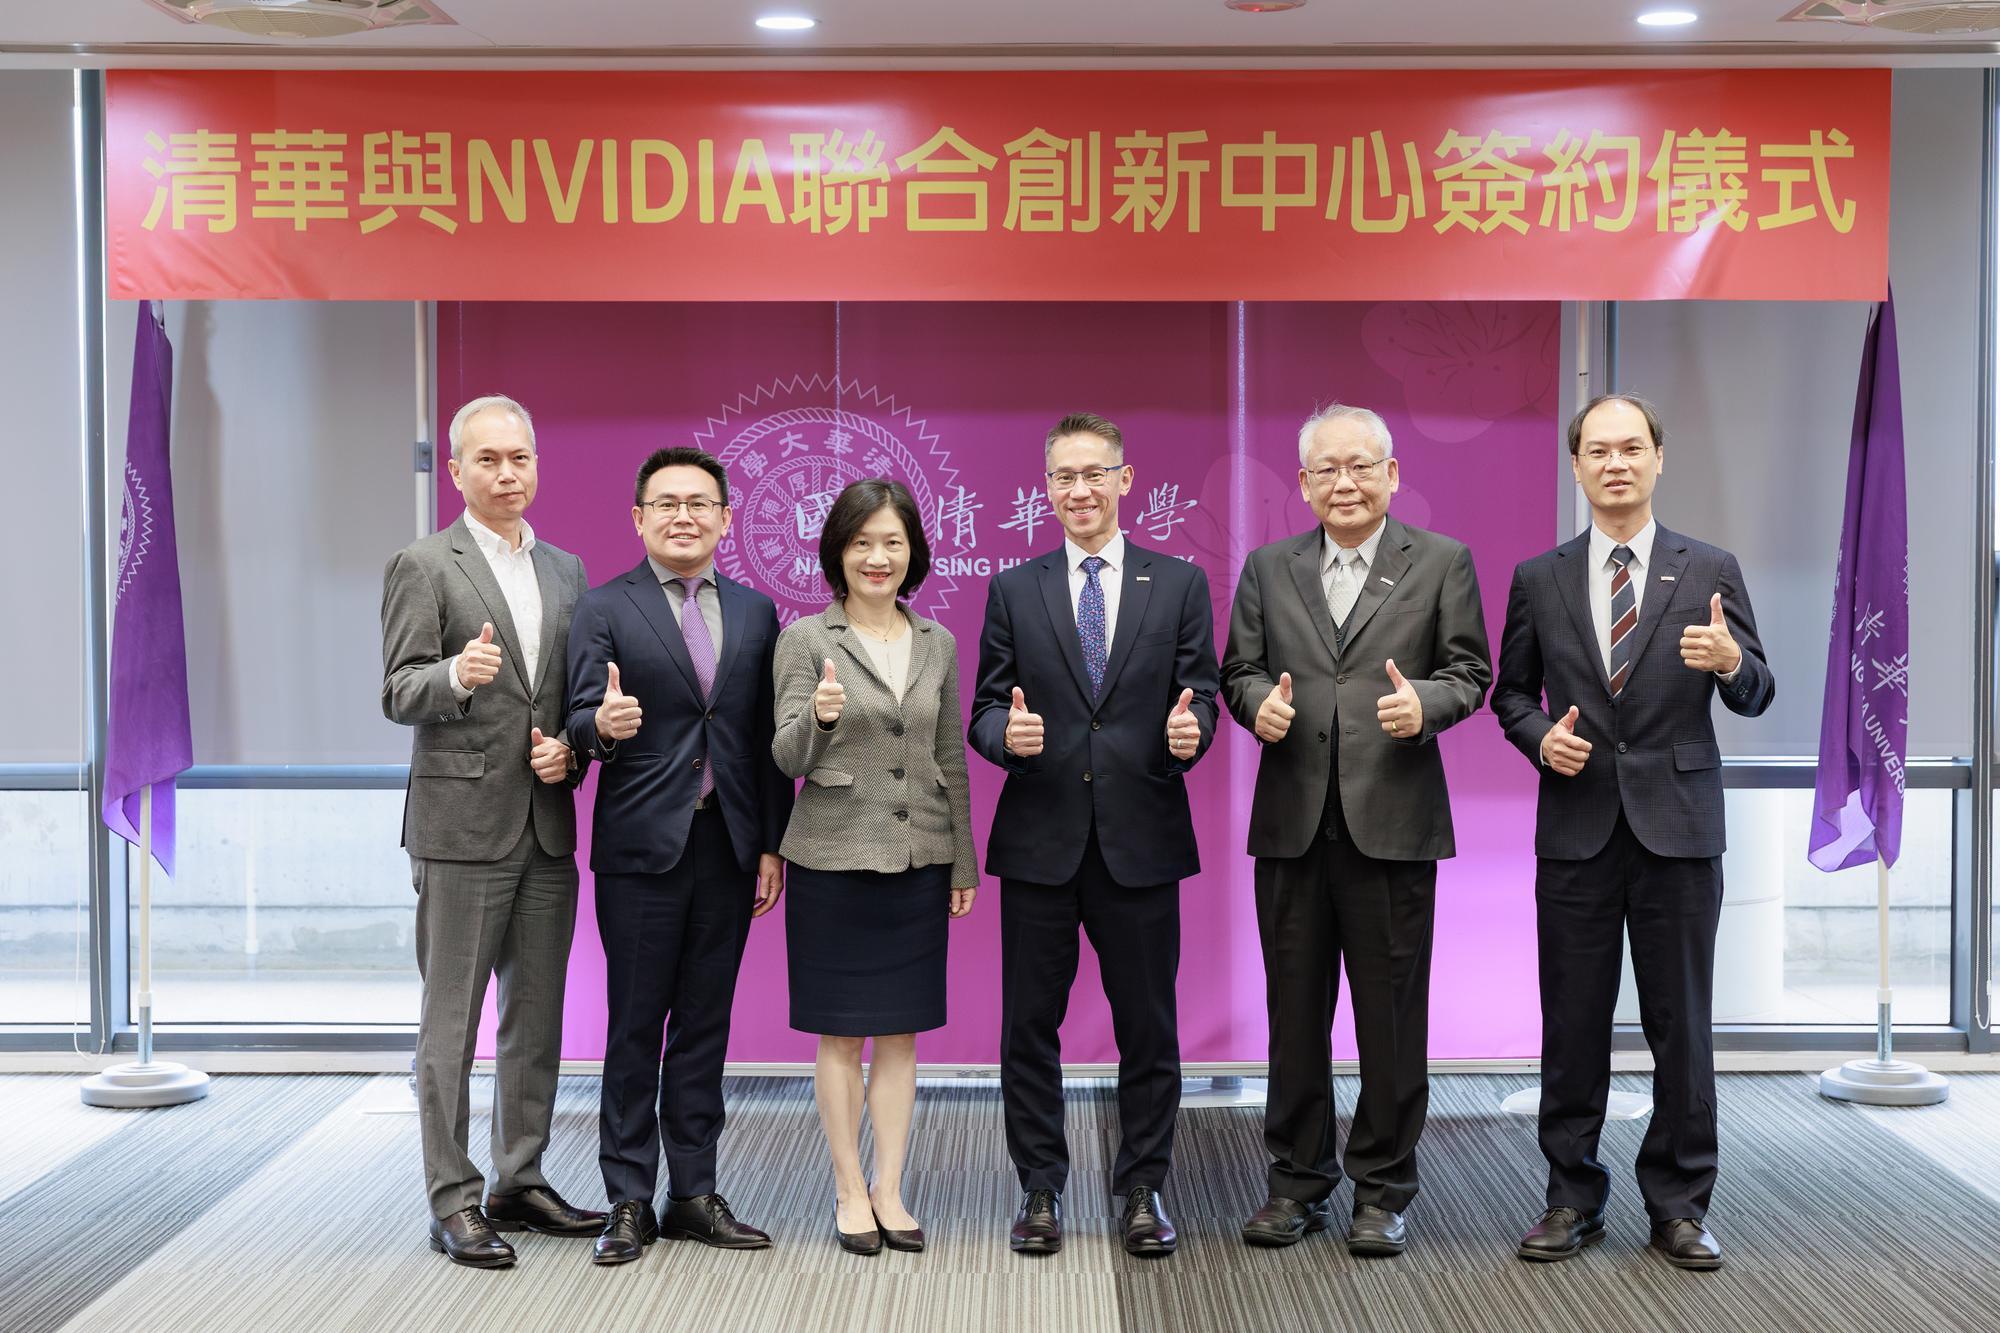 The inauguration of the Innovation Center was attended by important figures such as Vice President for Research and Development, Po-Wen Chiu (邱博文) (far right); Vice President Nyan-Hwa Tai (戴念華); President W. John Kao (高為元); NVIDIA Vice President and General Manager Taiwan, Eunice Chiu (邱麗孟); Director, NVIDIA, Ethan Hsiao (蕭怡祺); and Senior Business Development Manager, Denon Chang (張登隆).